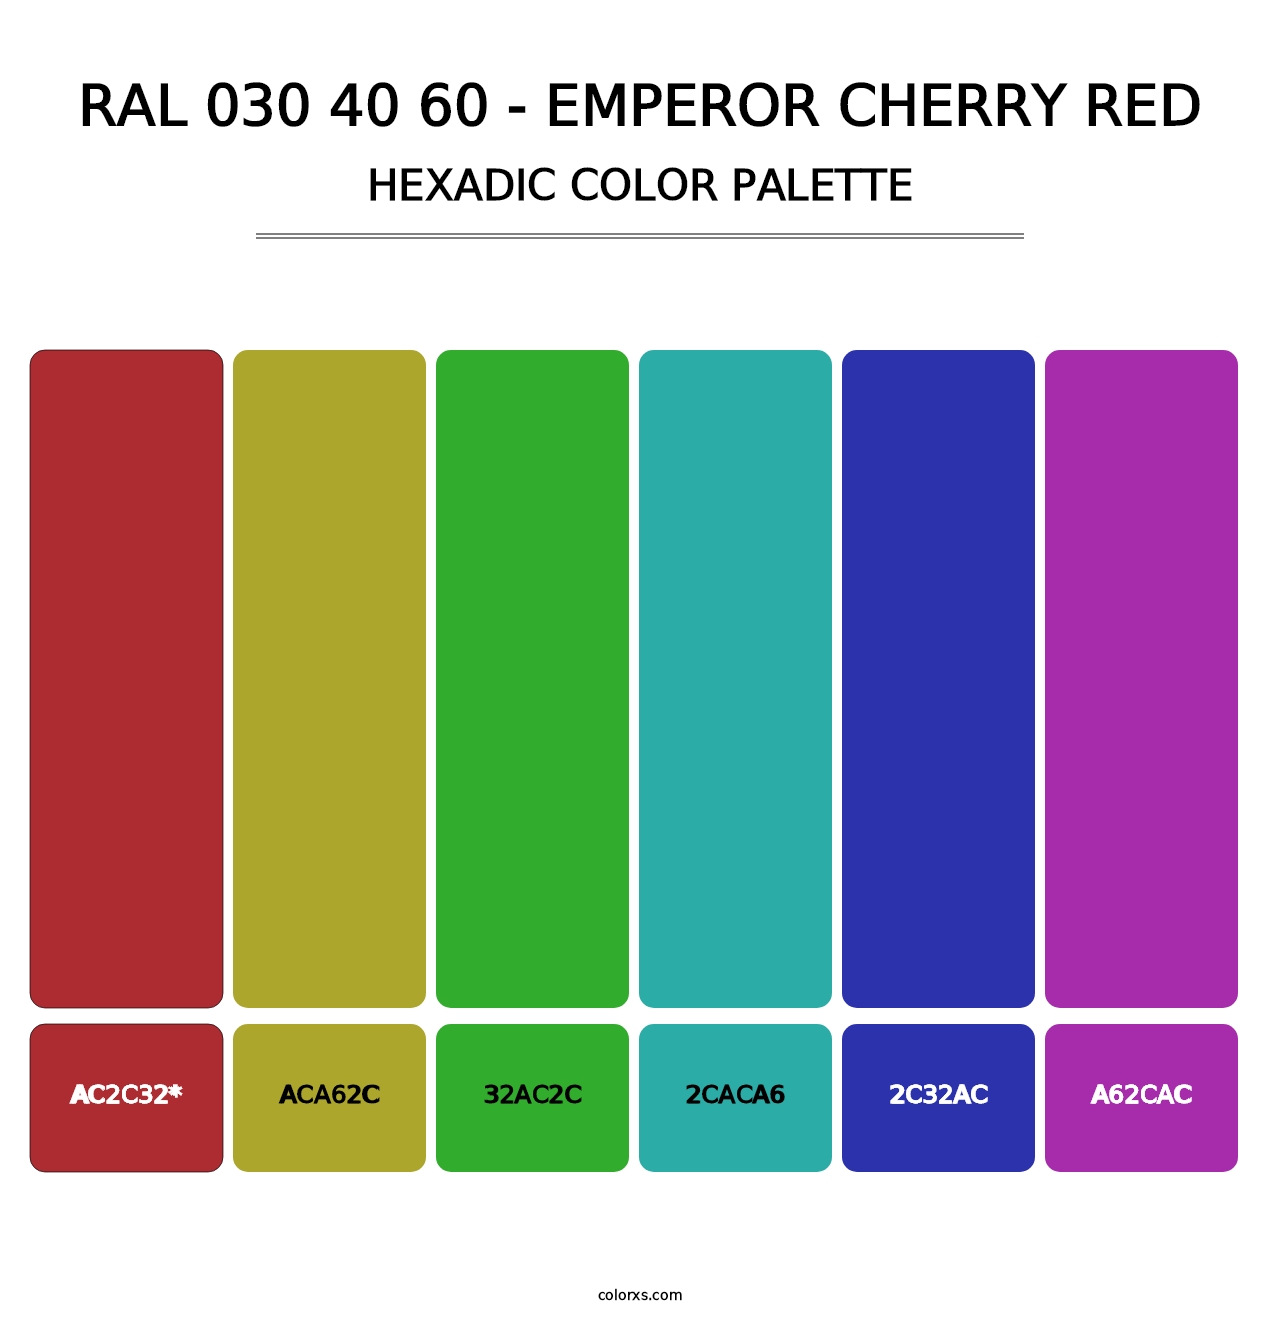 RAL 030 40 60 - Emperor Cherry Red - Hexadic Color Palette